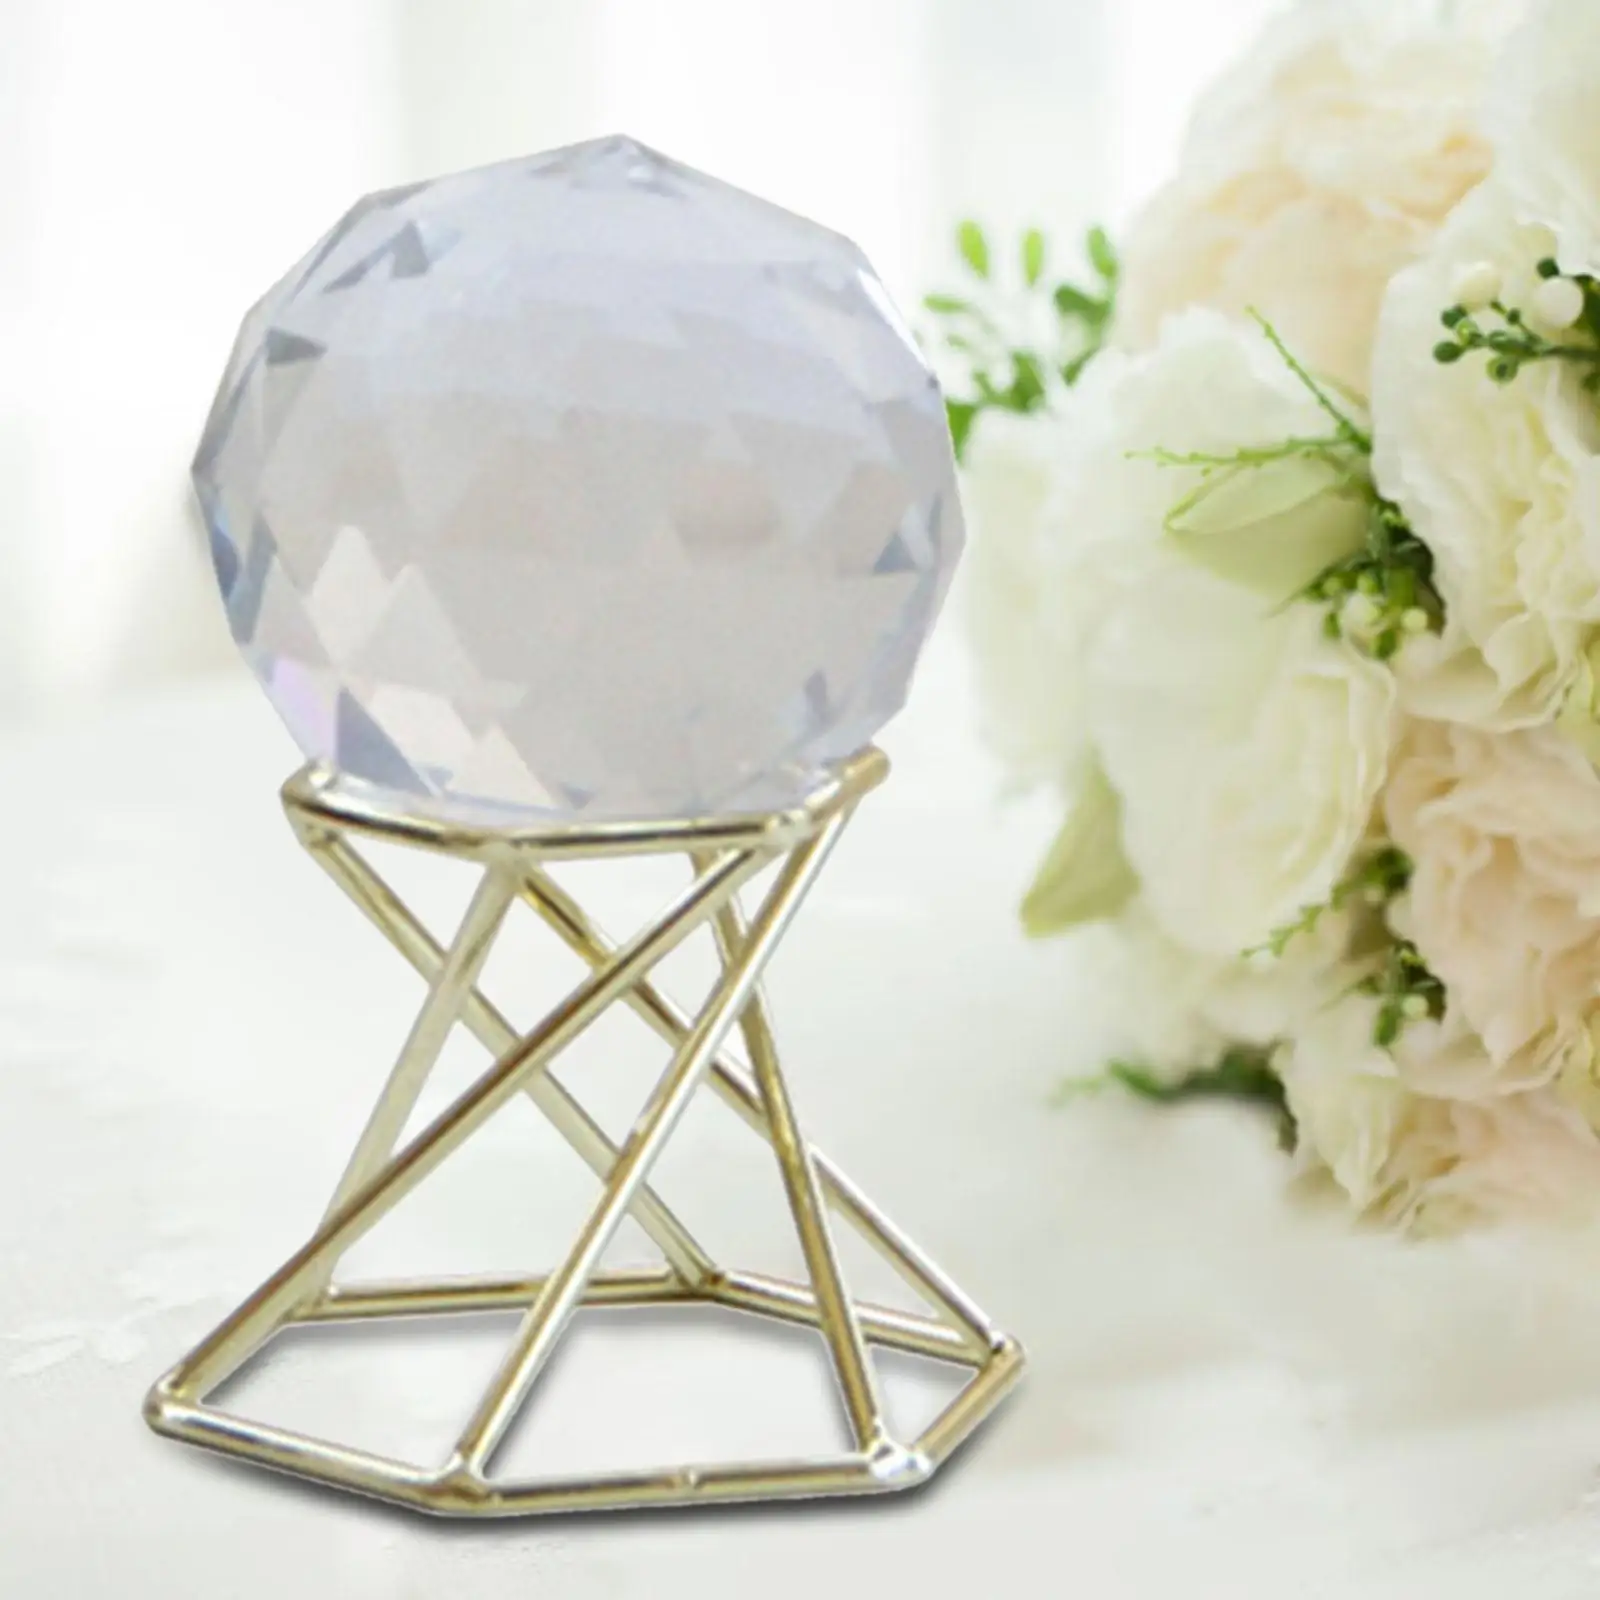 Decorative Ball with Display Stand Collection Craft Ball Holder for Desk Home Living Room Decor Gift